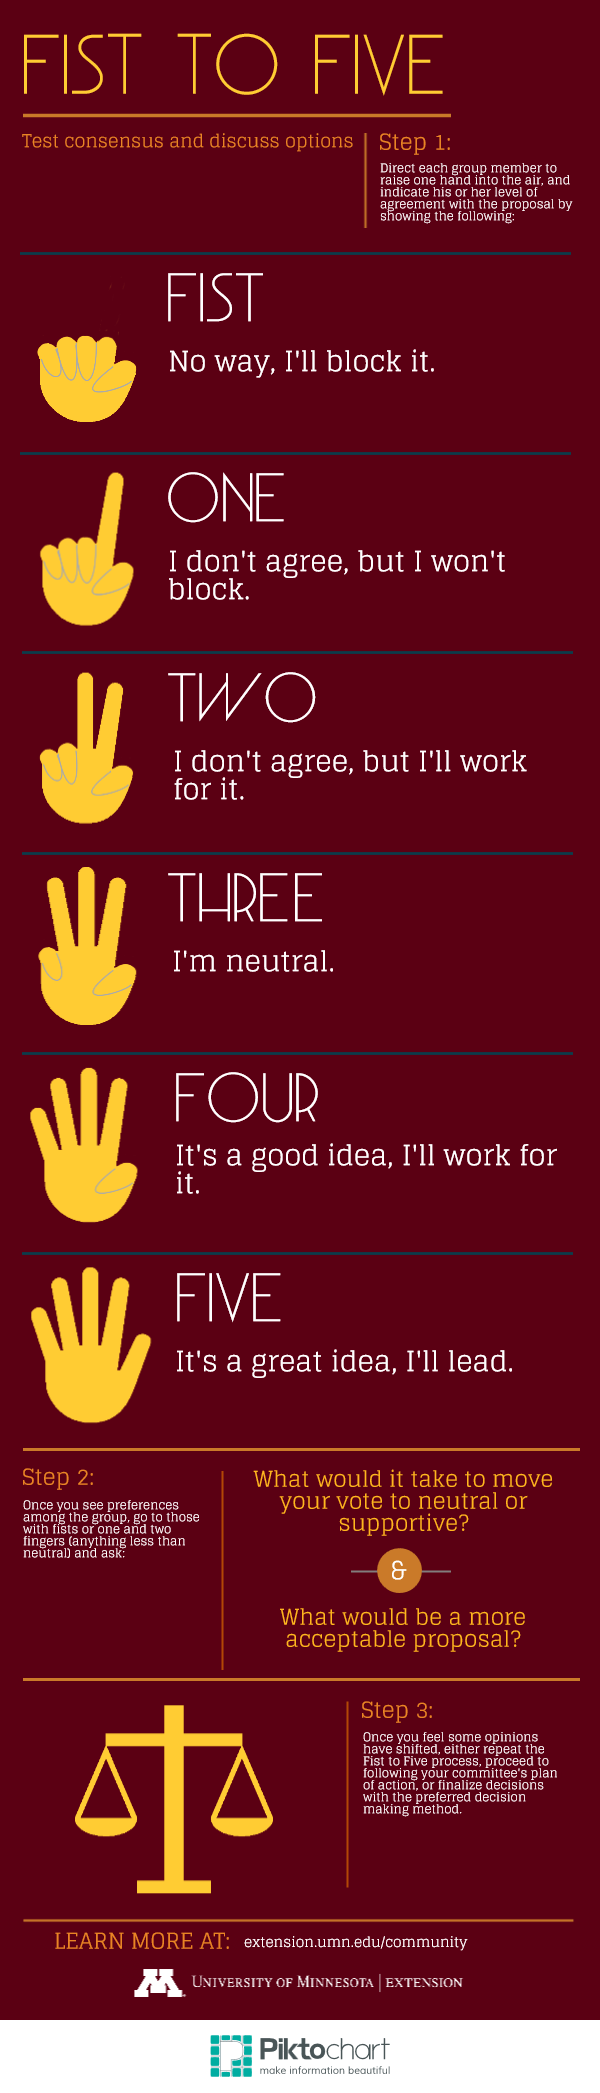 Fist to Five decision making process